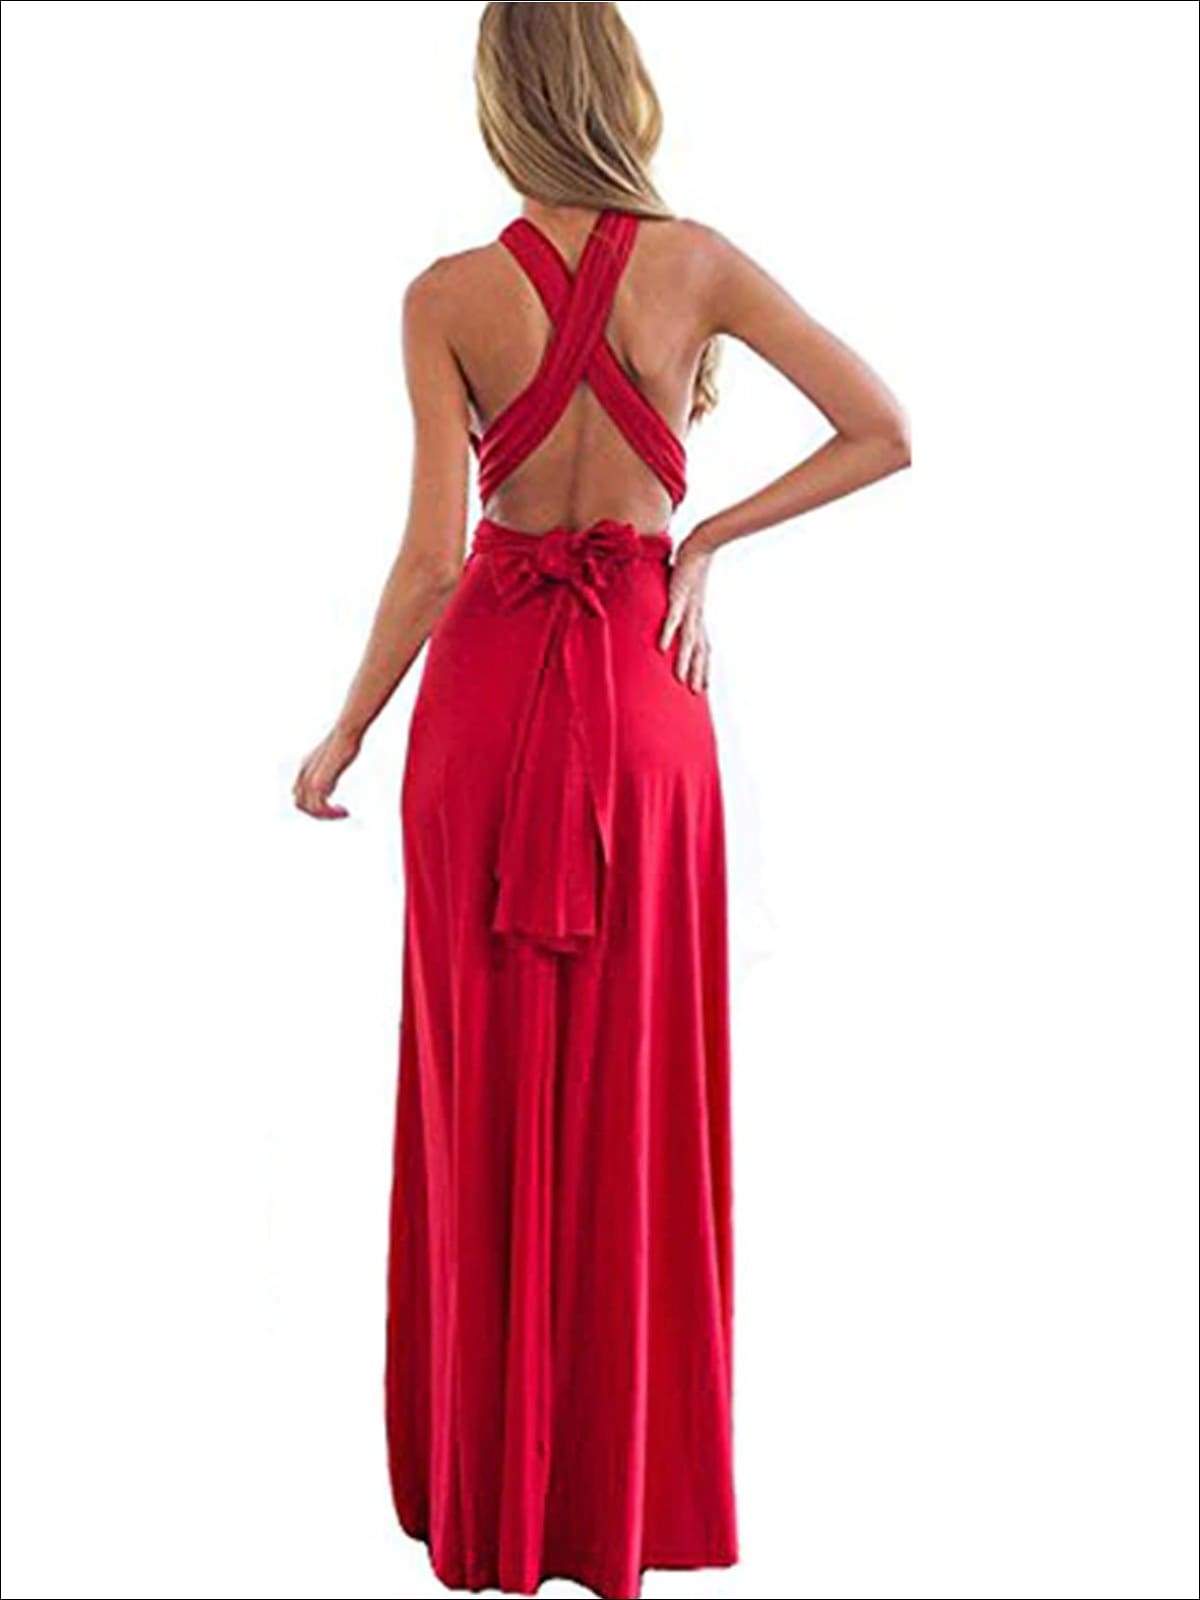 RED INFINITY DRESS WITH BRA CUP, Women's Fashion, Dresses & Sets